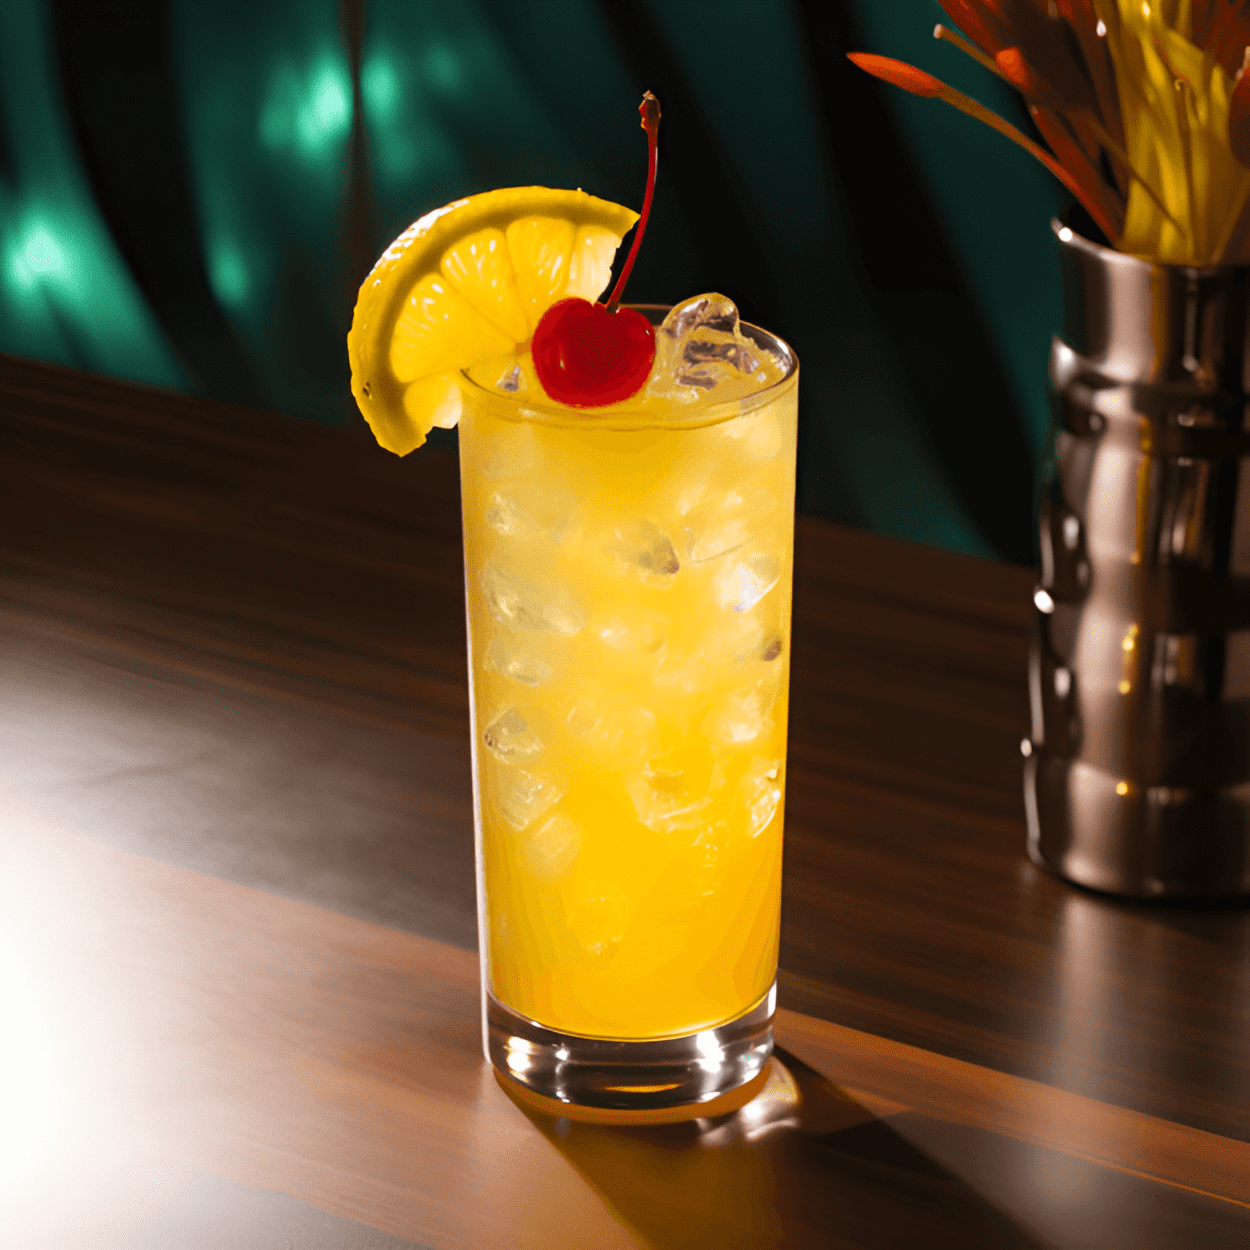 Staten Island Ferry Cocktail Recipe - The Staten Island Ferry cocktail is a sweet, tropical drink. It has a strong pineapple flavor with a hint of coconut. The rum adds a bit of warmth and complexity to the cocktail, making it a perfect balance of sweet and strong.